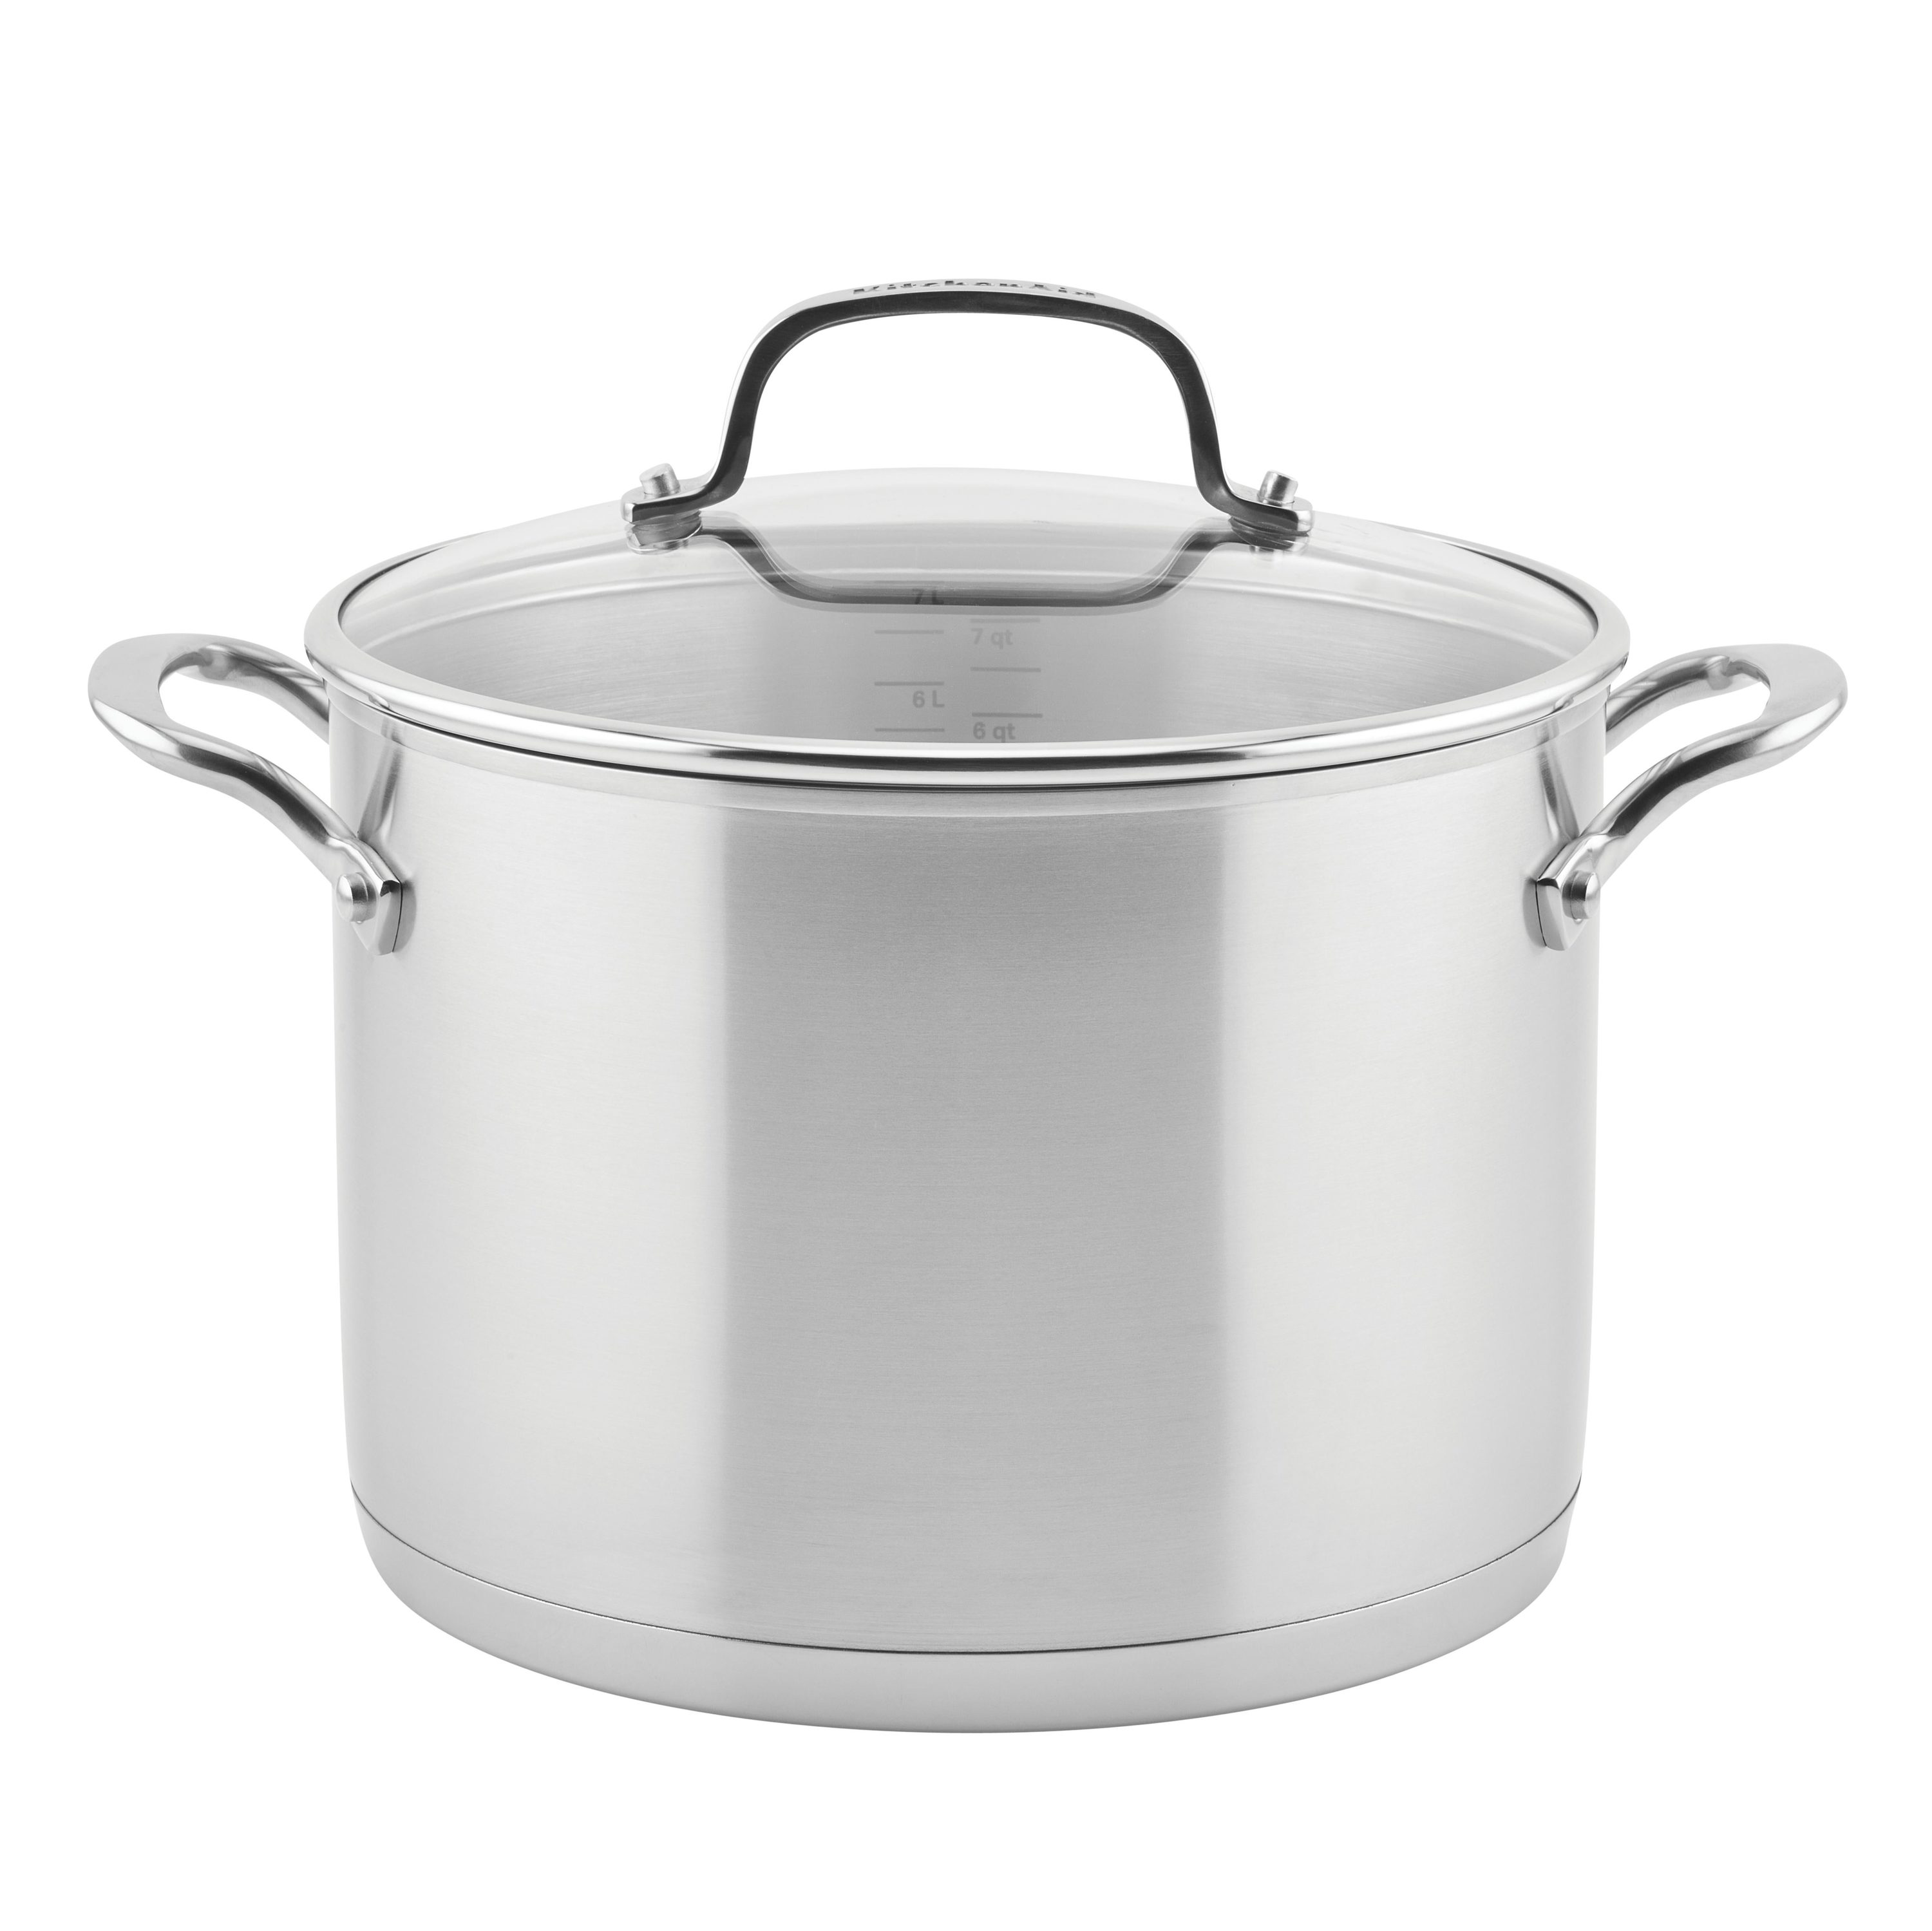 Ryori Stainless Steel Saucepan - 4 Quart, Tri-Ply, Aluminum Core, Oven  Safe, Professional Grade Non-Stick Cooking Pot with Lid - Polished  Stainless